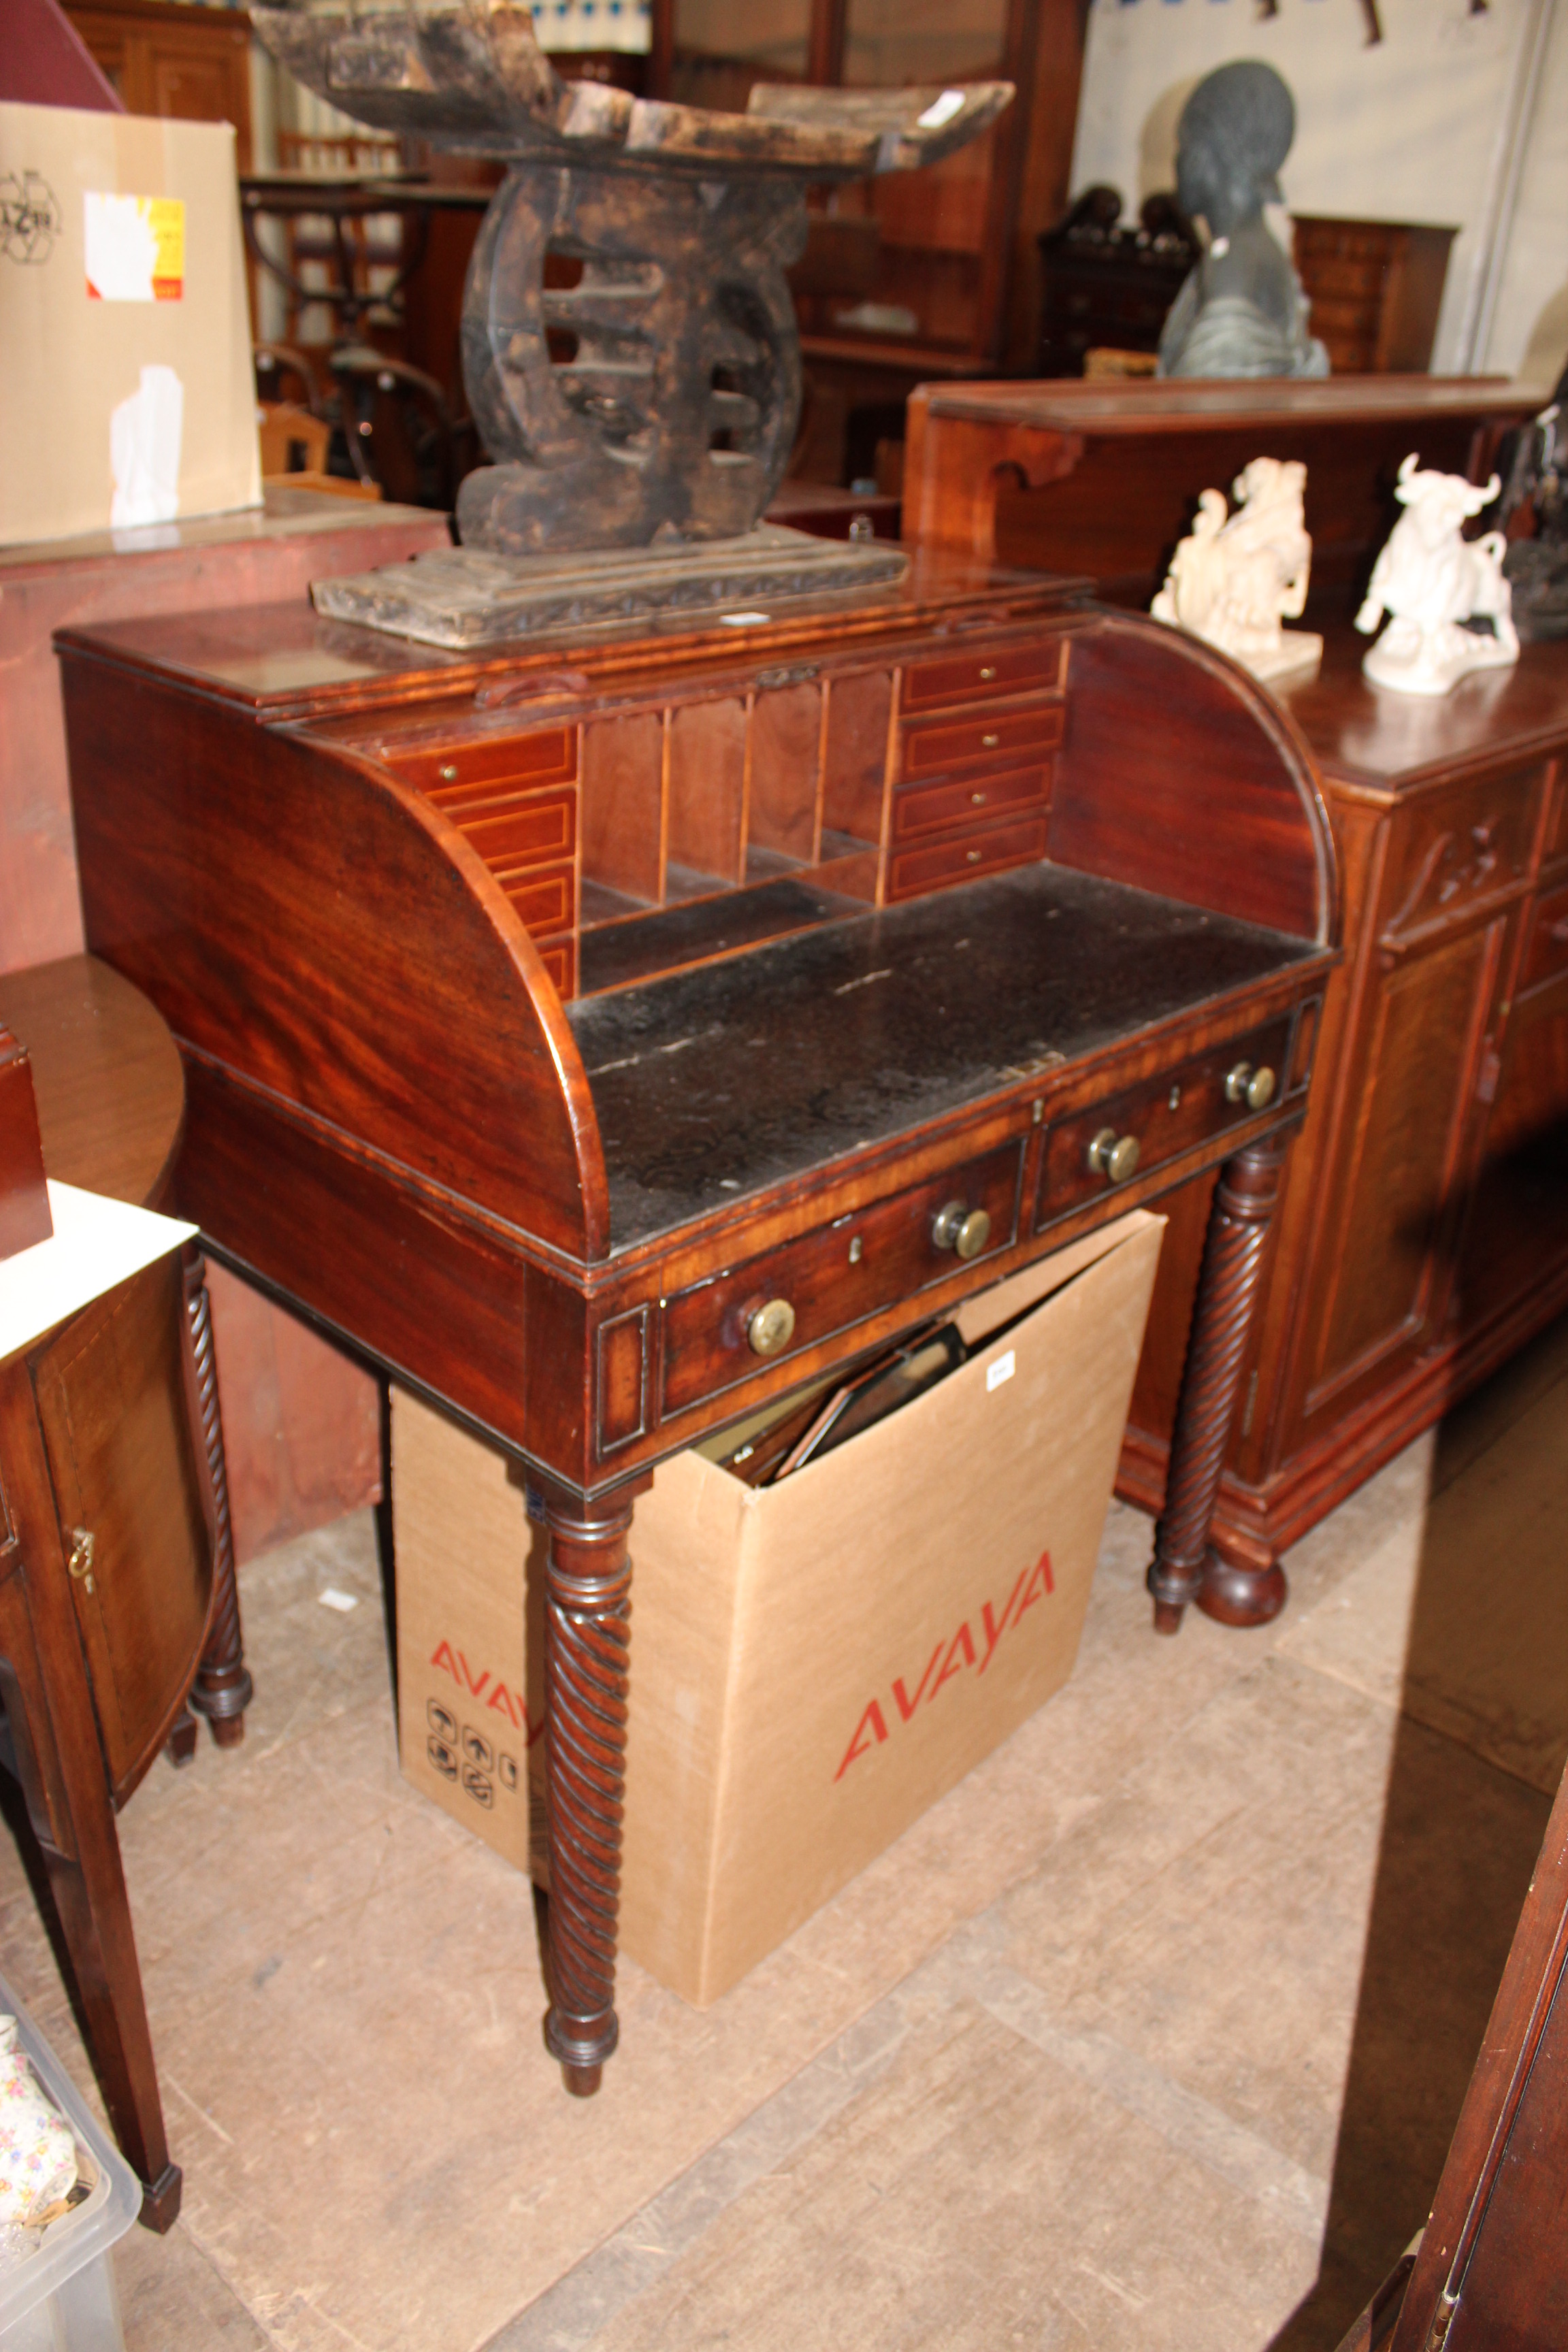 A GEORGE IV MAHOGANY WRITING DESK with tambour fall front, two drawers and spiral turned legs, 93cm